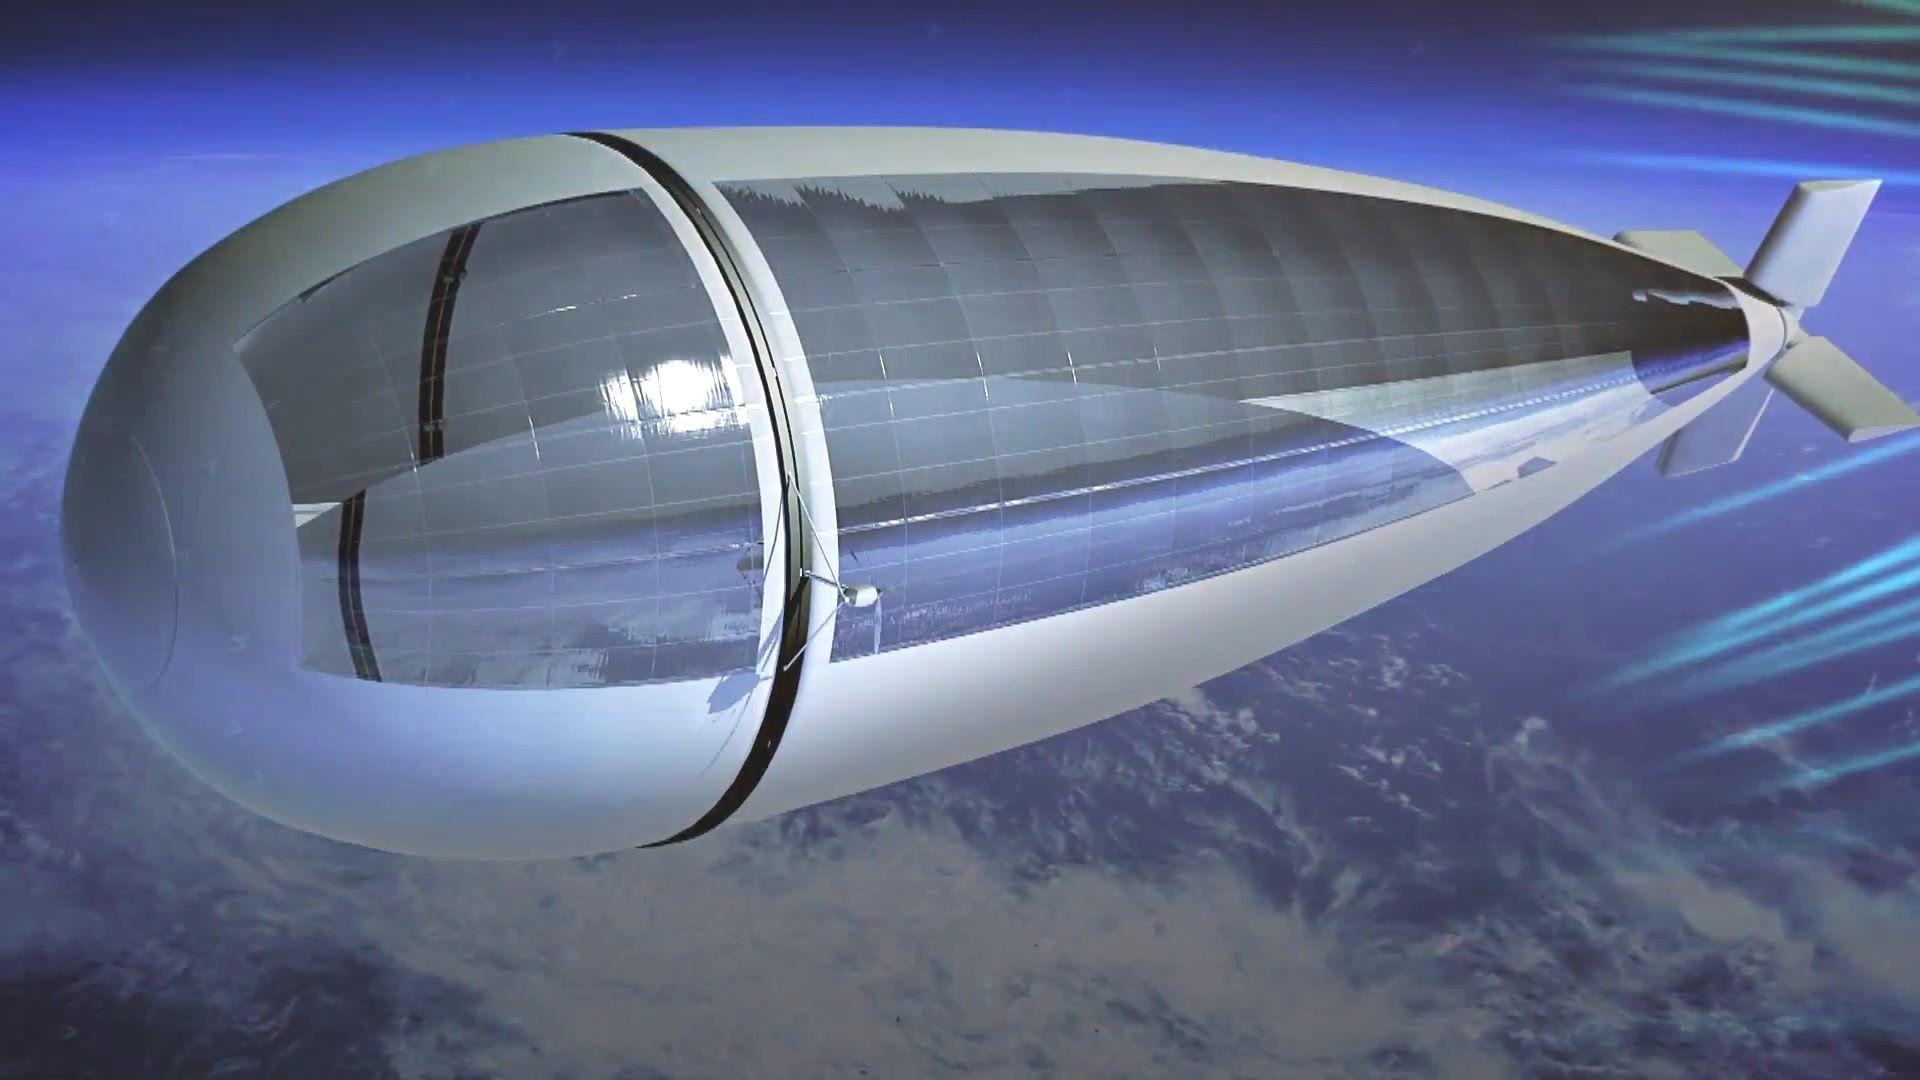 Thales Stratobus to launch into stratosphere